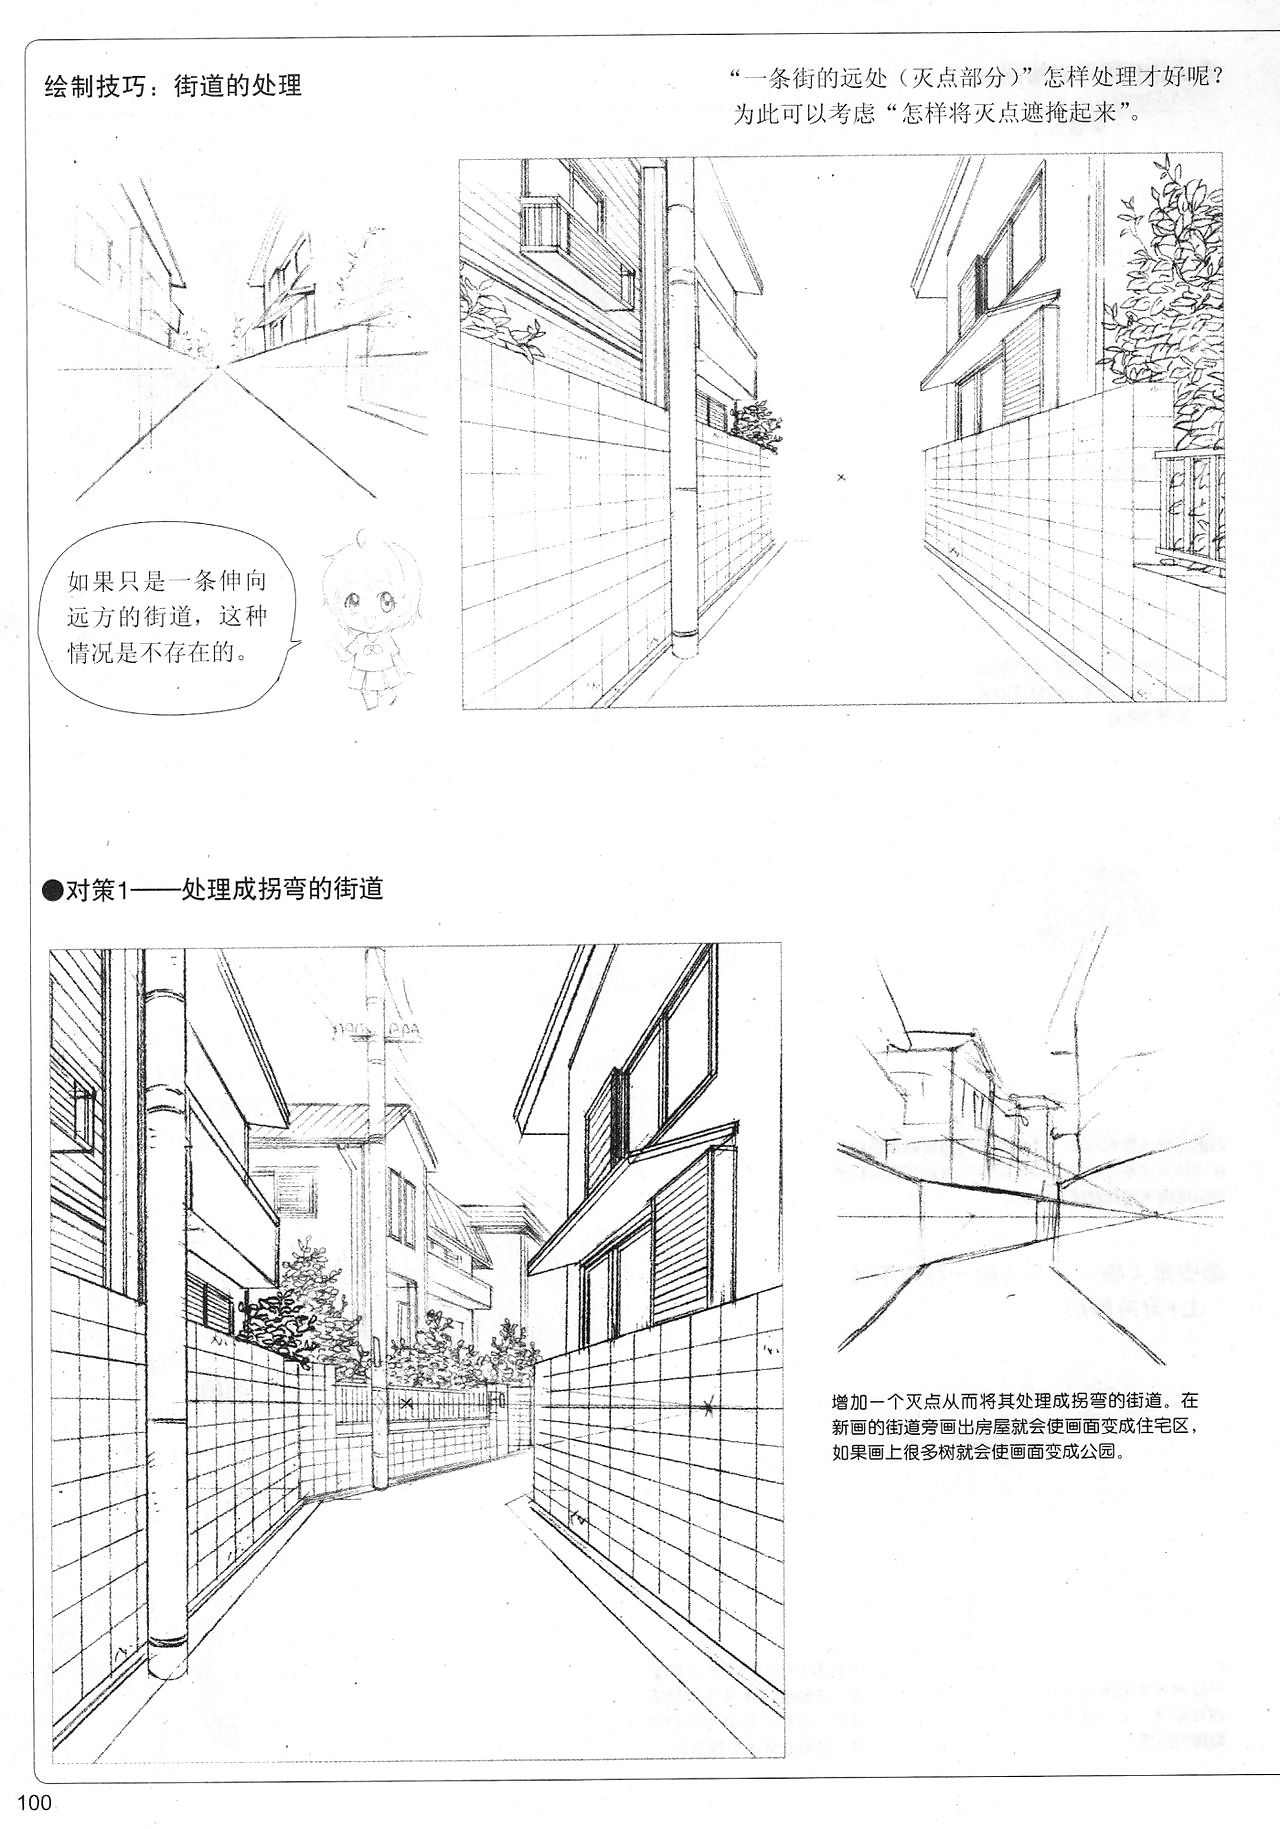 No matter what yon Sound out Manga: Sketching Manga-Style Come up to b become 4: For everyone Beside Ken - loyalty 6